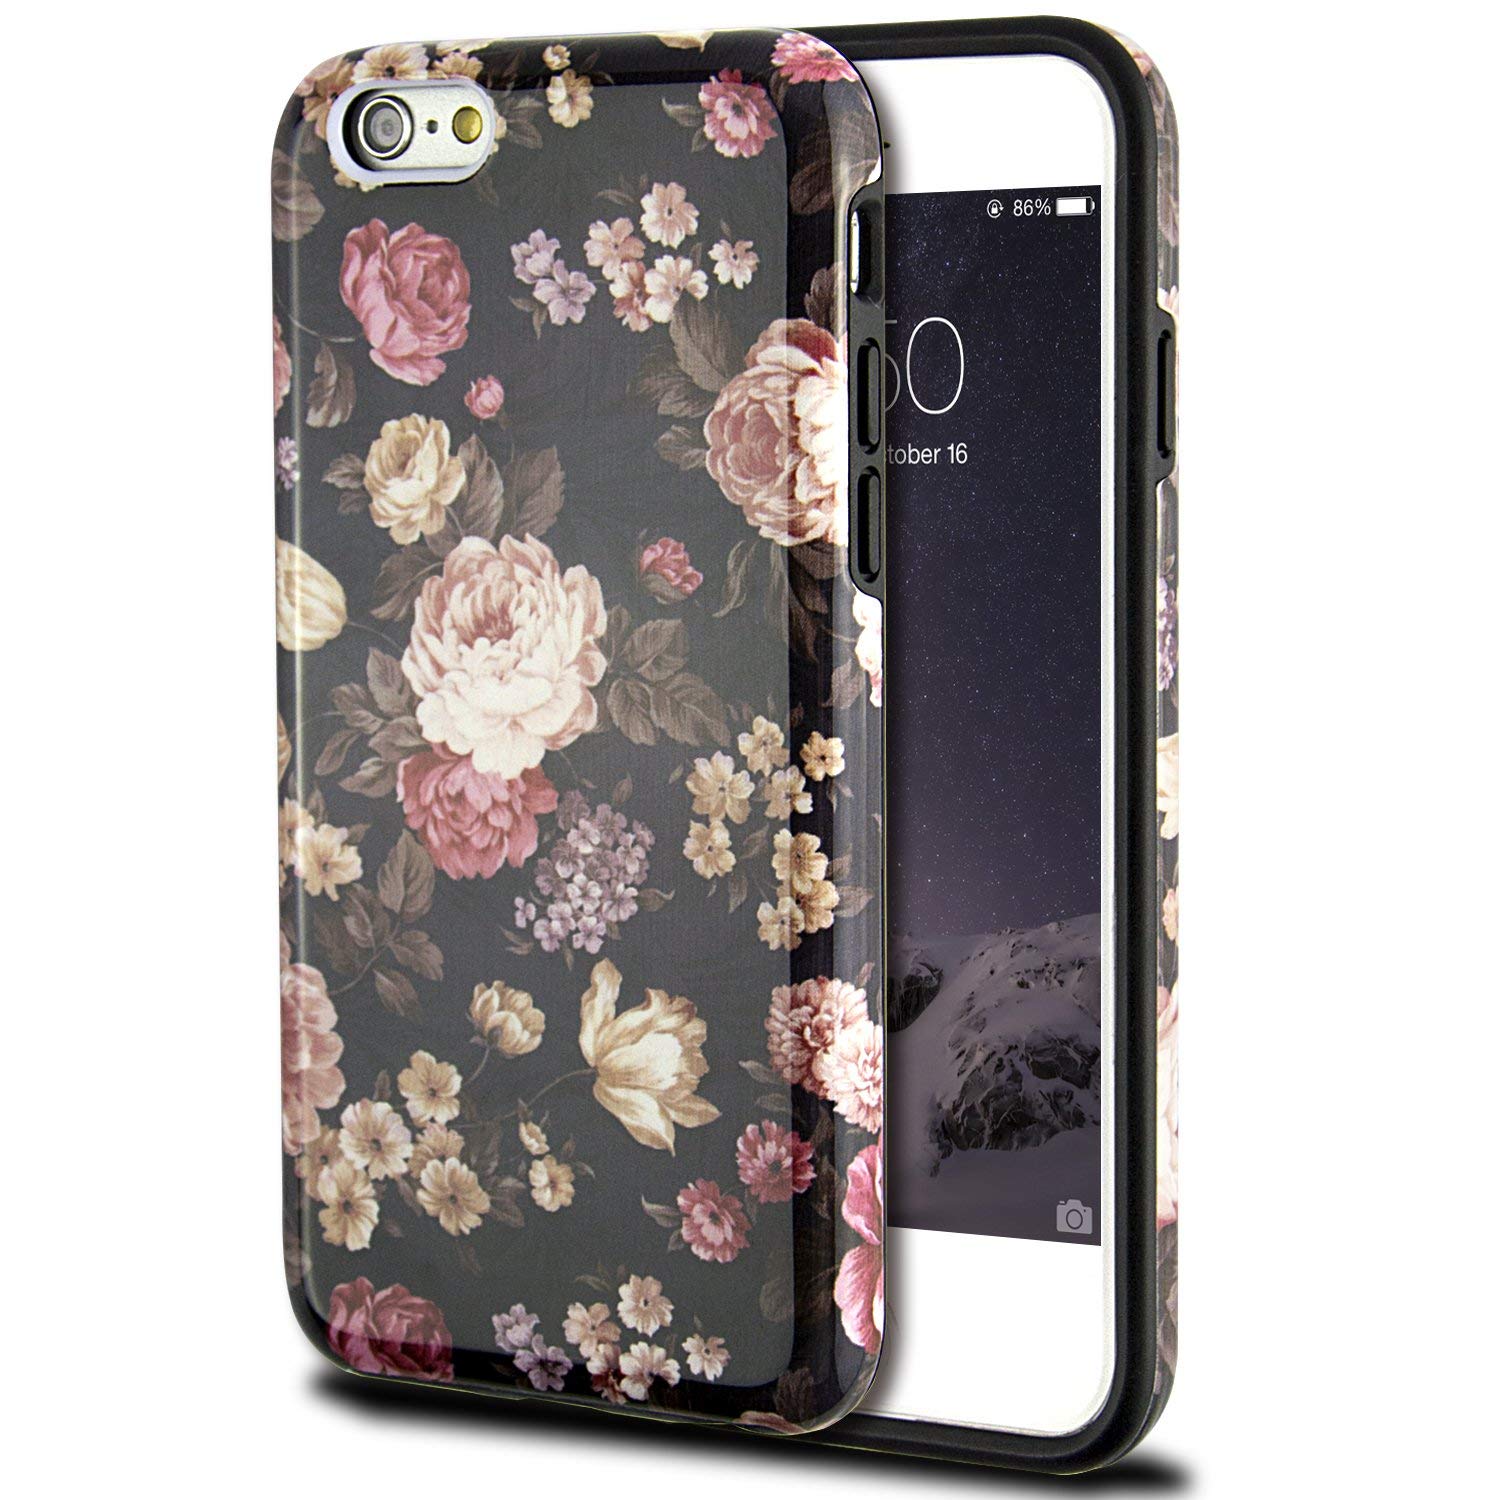 iPhone 6S Case for Girls, Cute 6S Case, Dimaka Floral Pattern Double